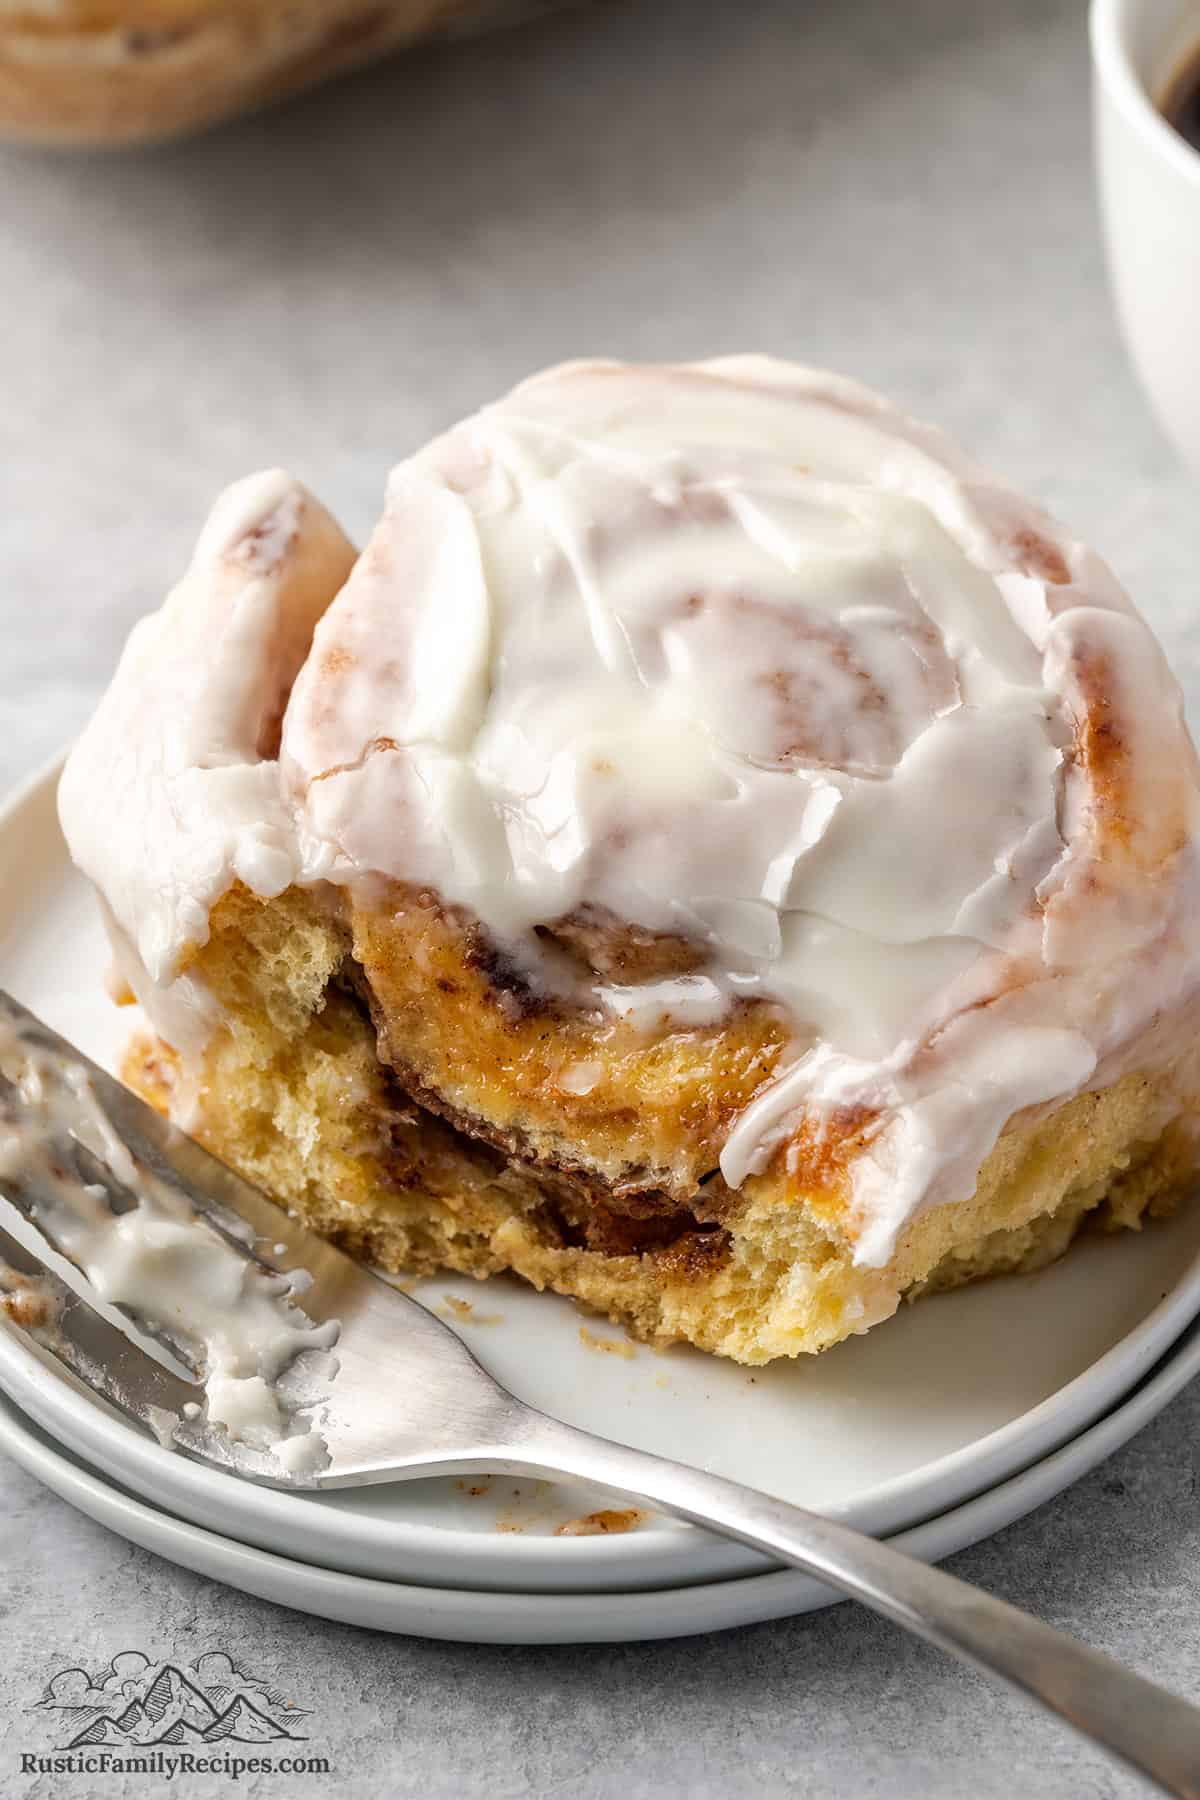 A cinnamon bun on a plate with a fork, a bite taken out